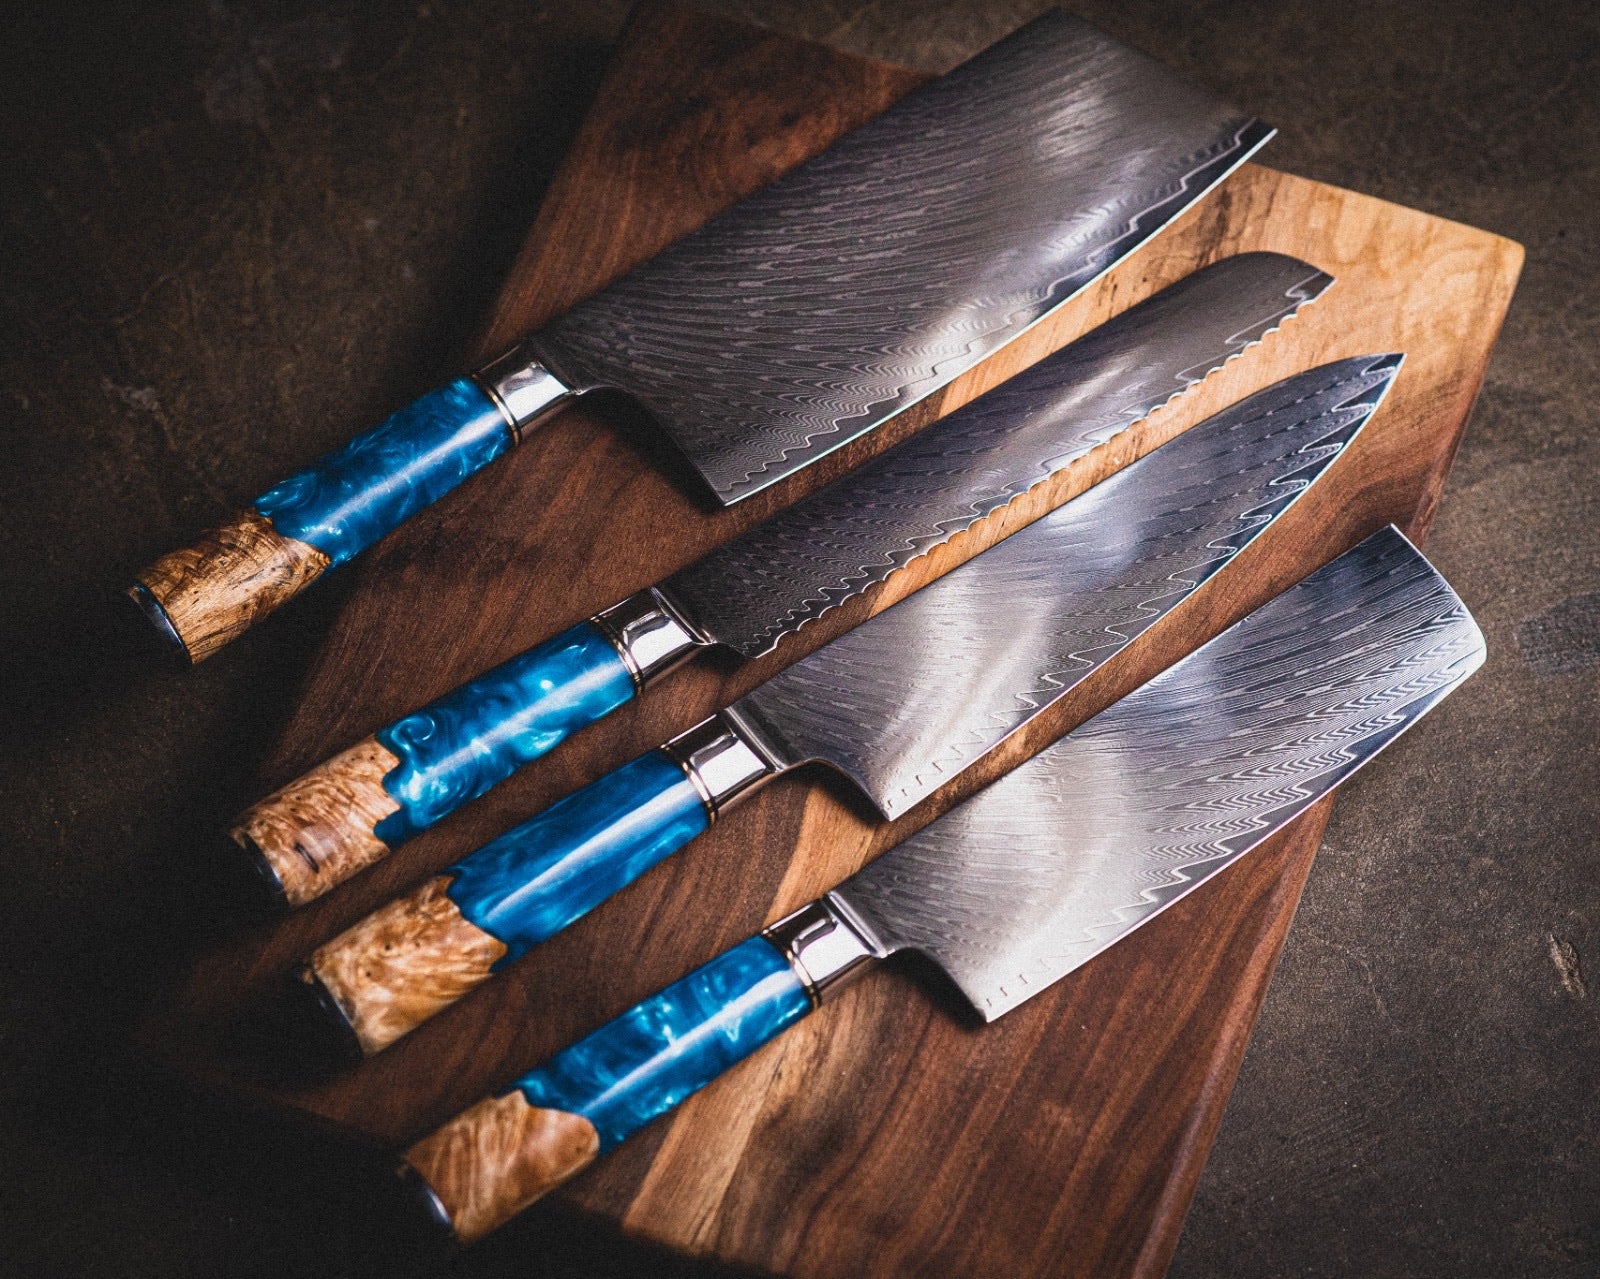 Build Your Own Knife Set, Japanese Damascus Steel VG10, 67 Layers